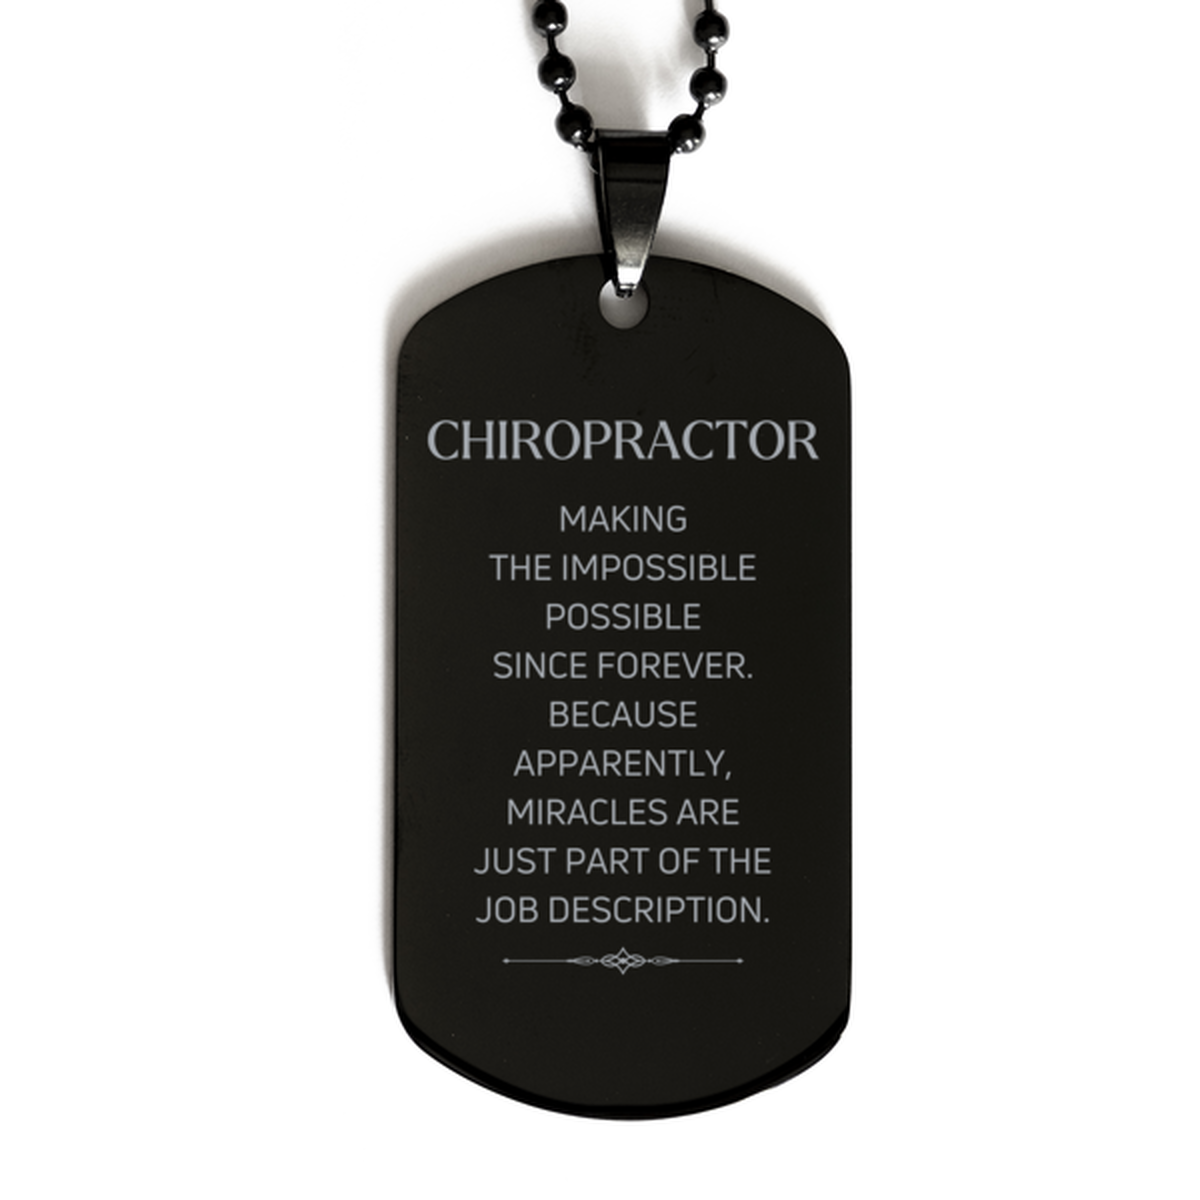 Funny Chiropractor Gifts, Miracles are just part of the job description, Inspirational Birthday Black Dog Tag For Chiropractor, Men, Women, Coworkers, Friends, Boss